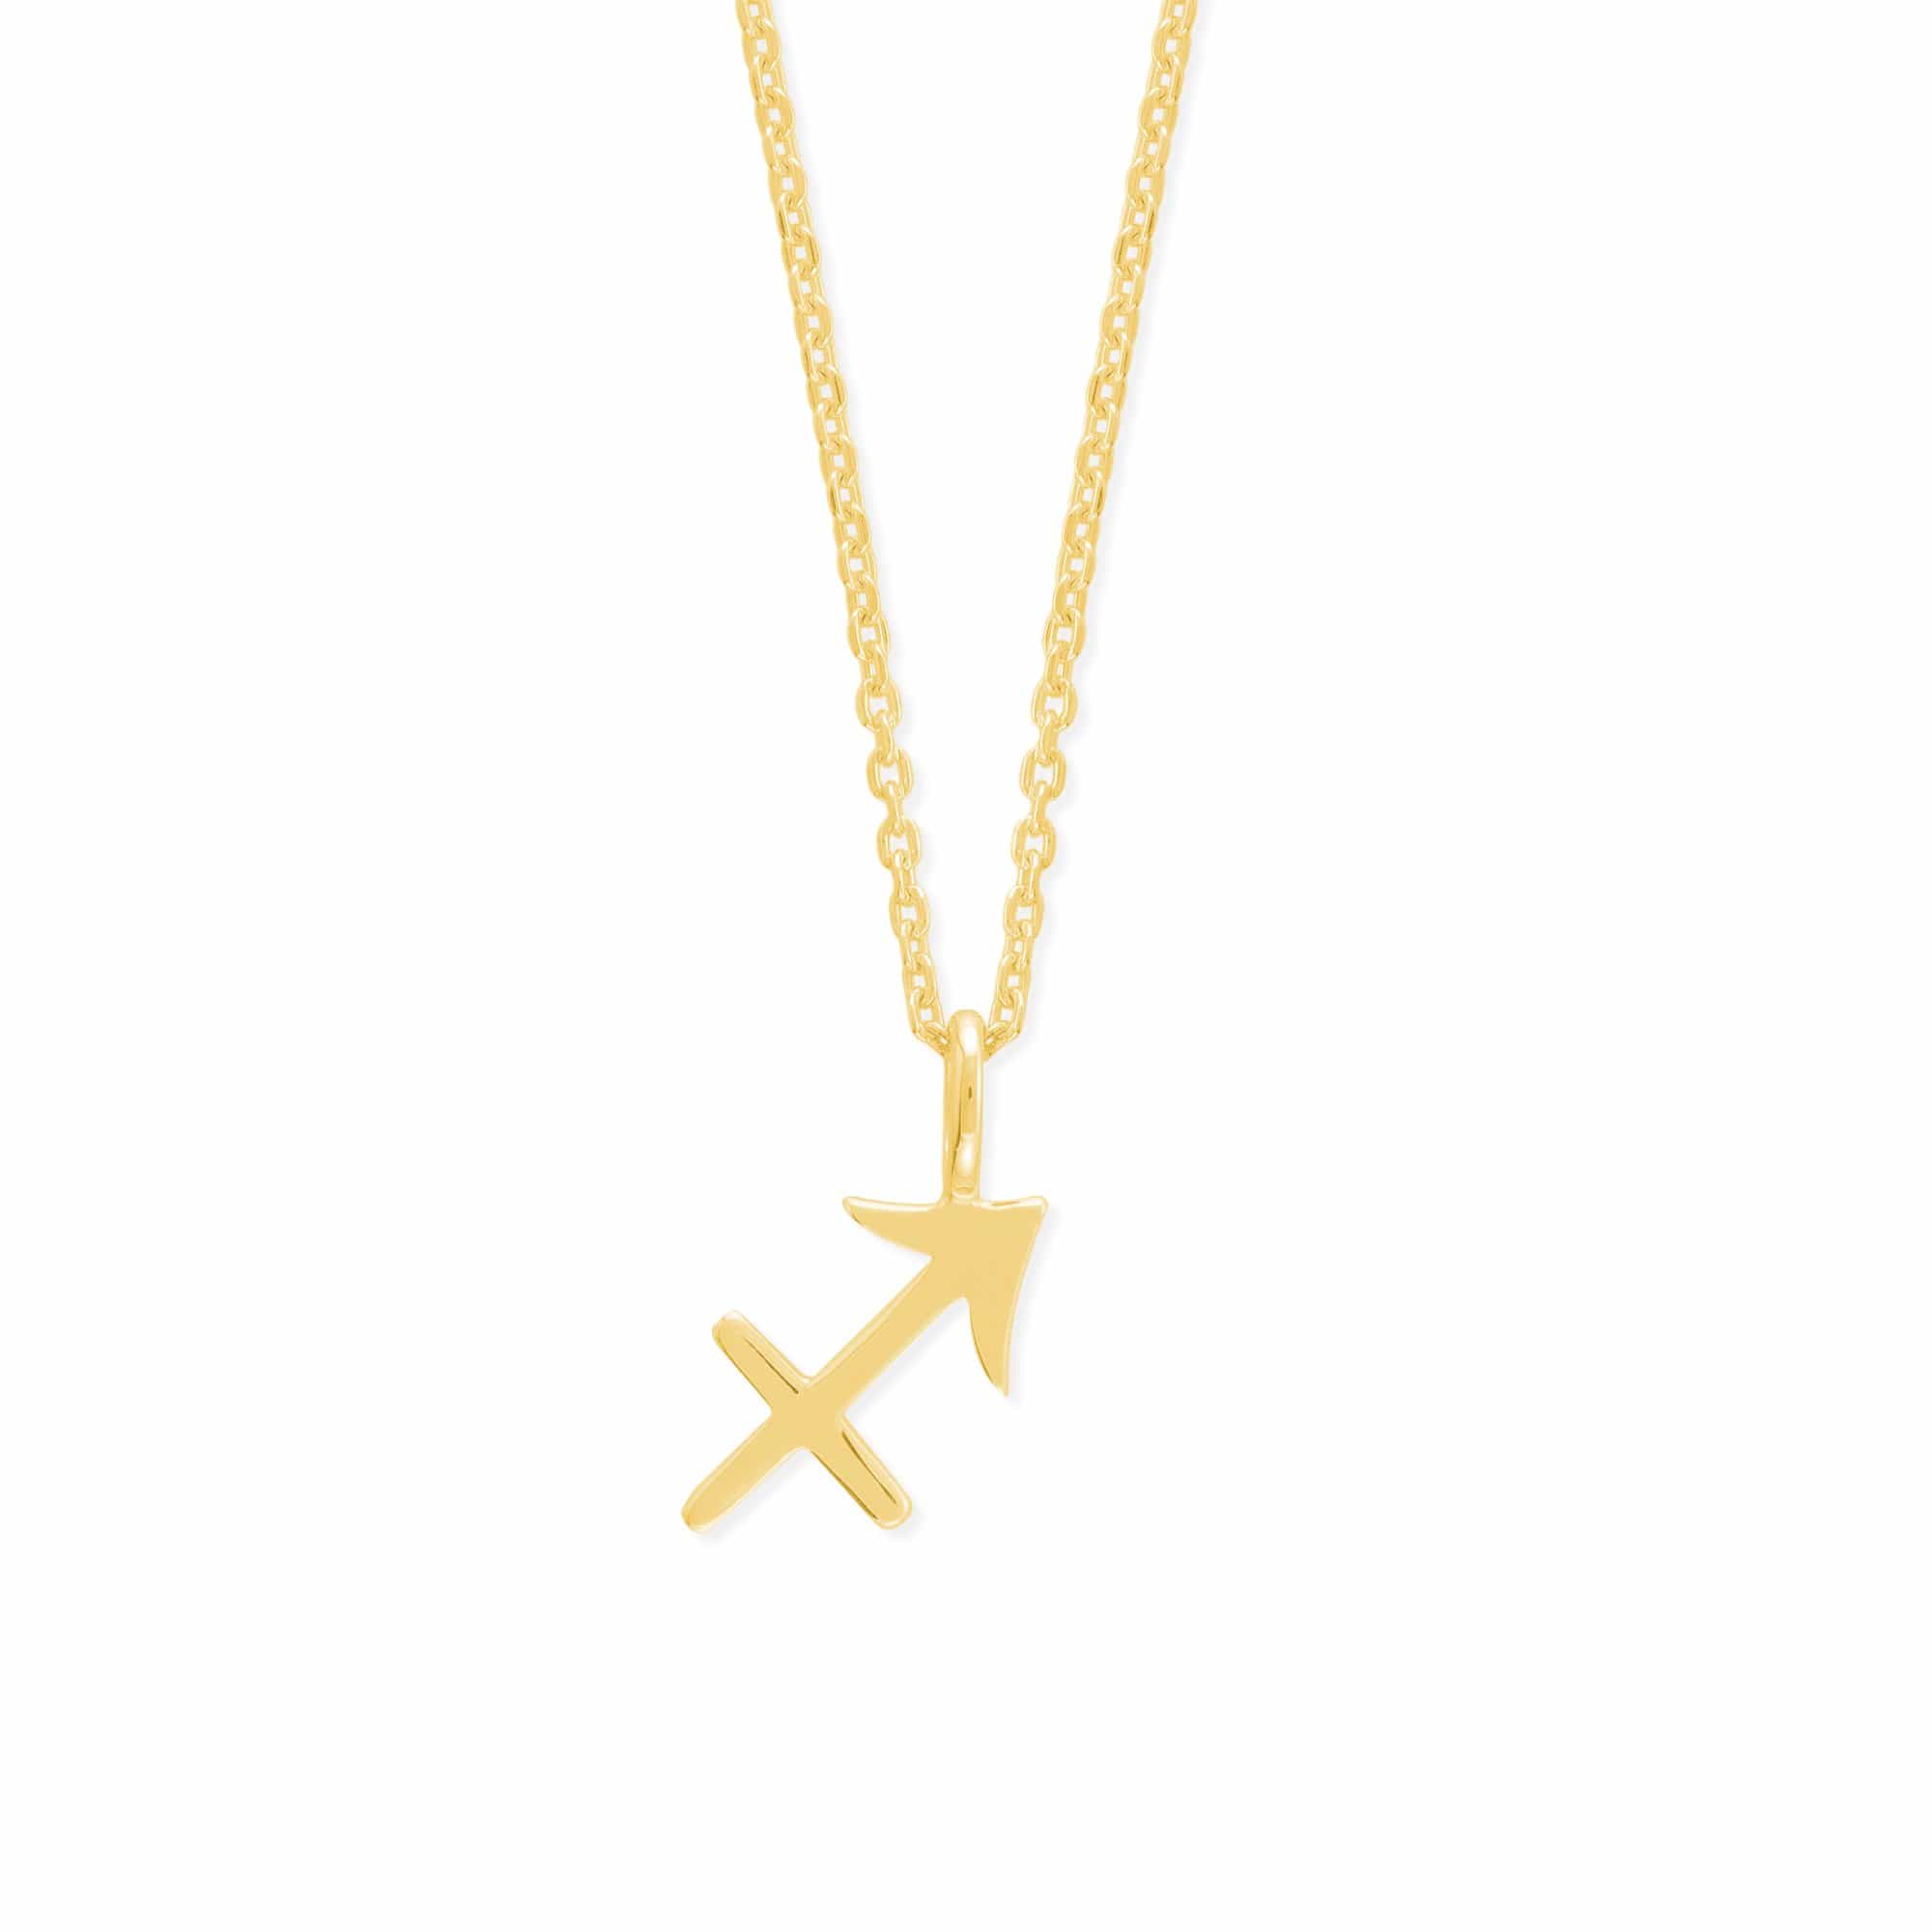 Boma Jewelry Necklaces 14K Gold Plated / Sagittarius Zodiac Necklace